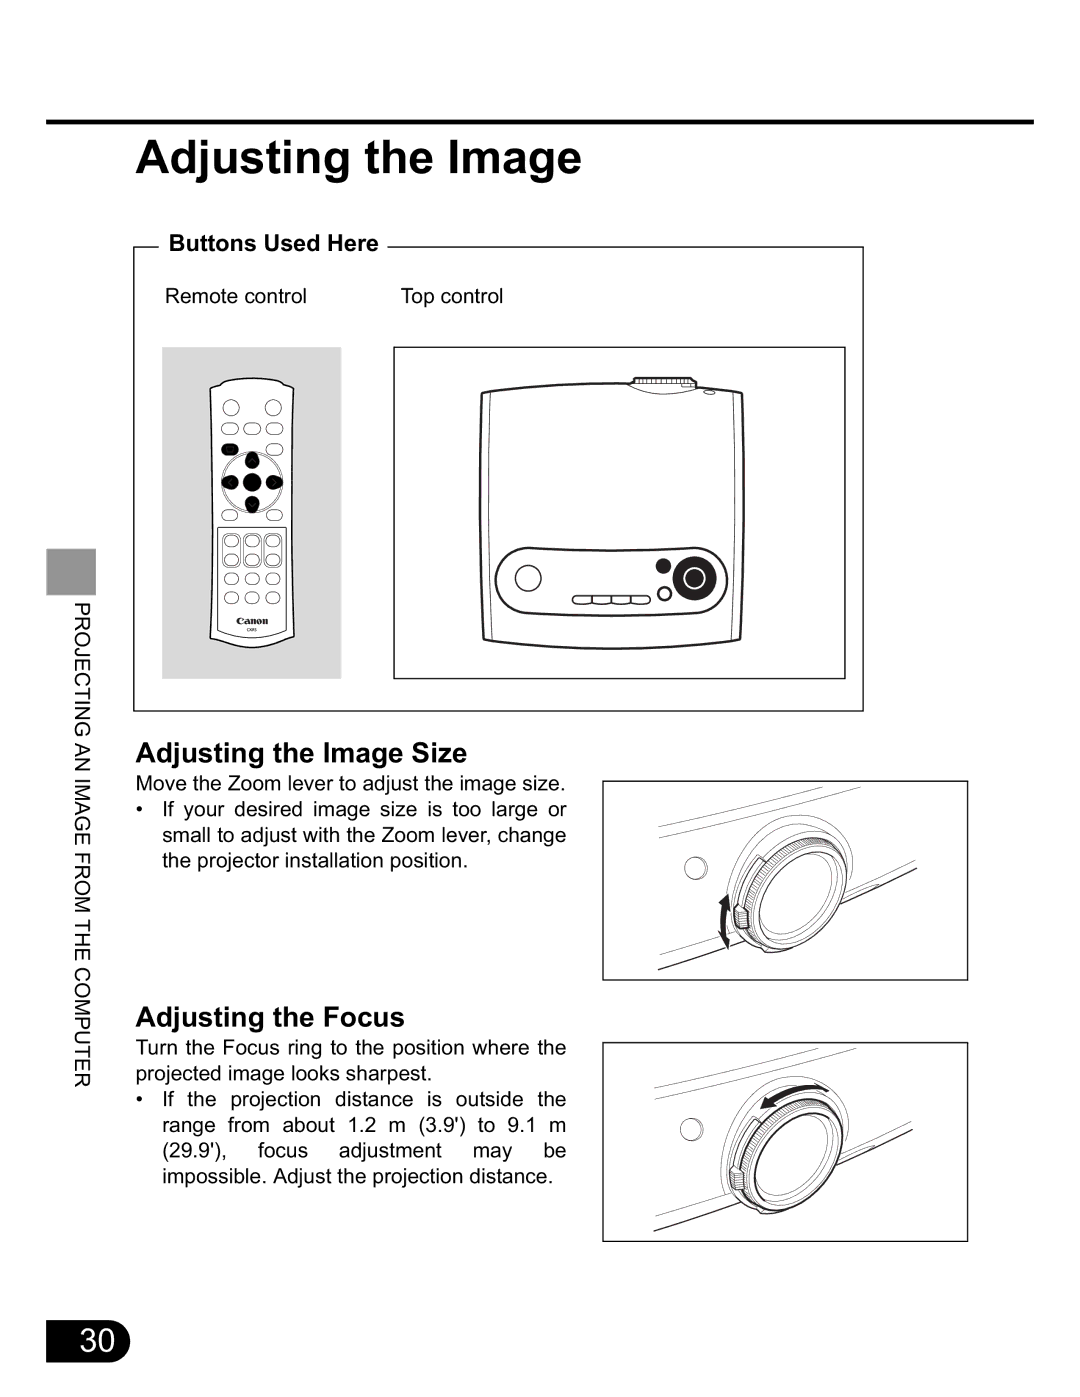 Canon SX20 manual Adjusting the Image Size, Adjusting the Focus 